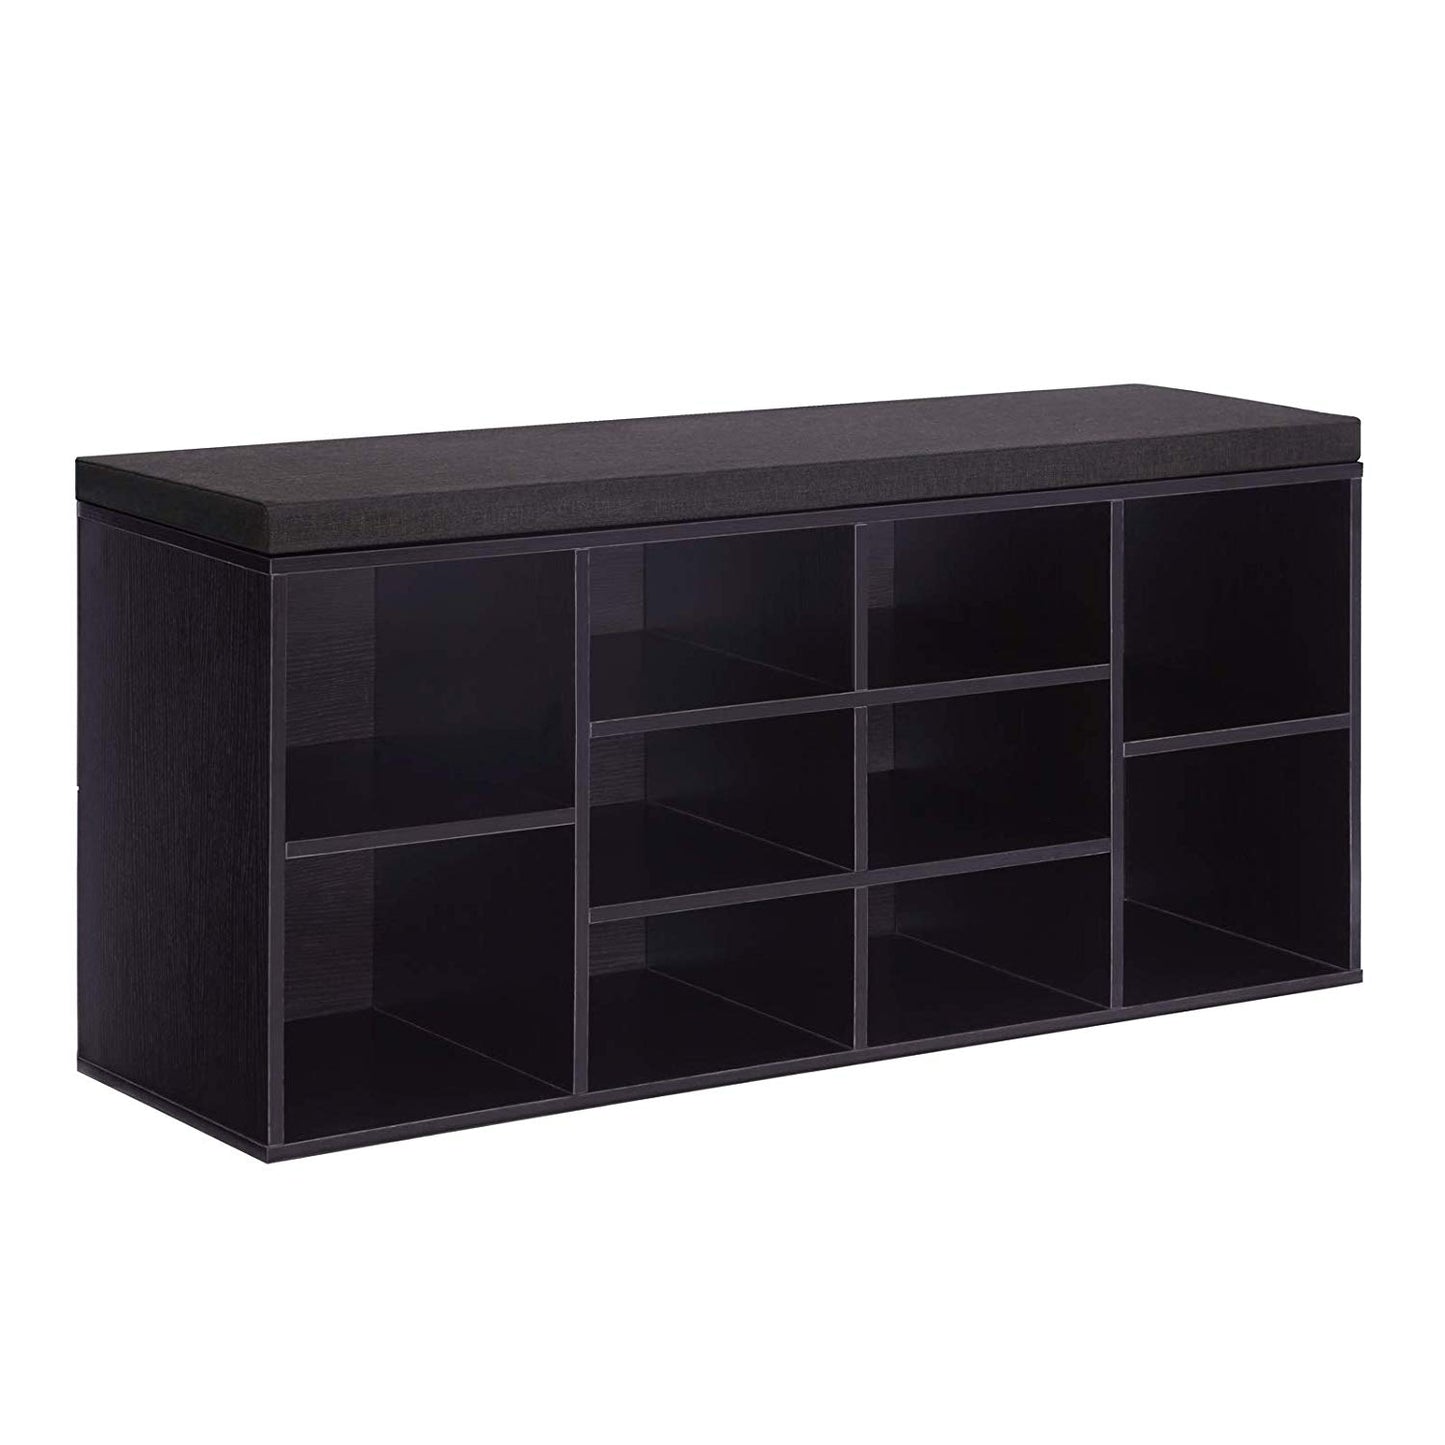 VASAGLE Cubbie Shoe Cabinet Storage Bench with Cushion, Adjustable Shelves, Holds up to 440lb, Ebony, ULHS10BR